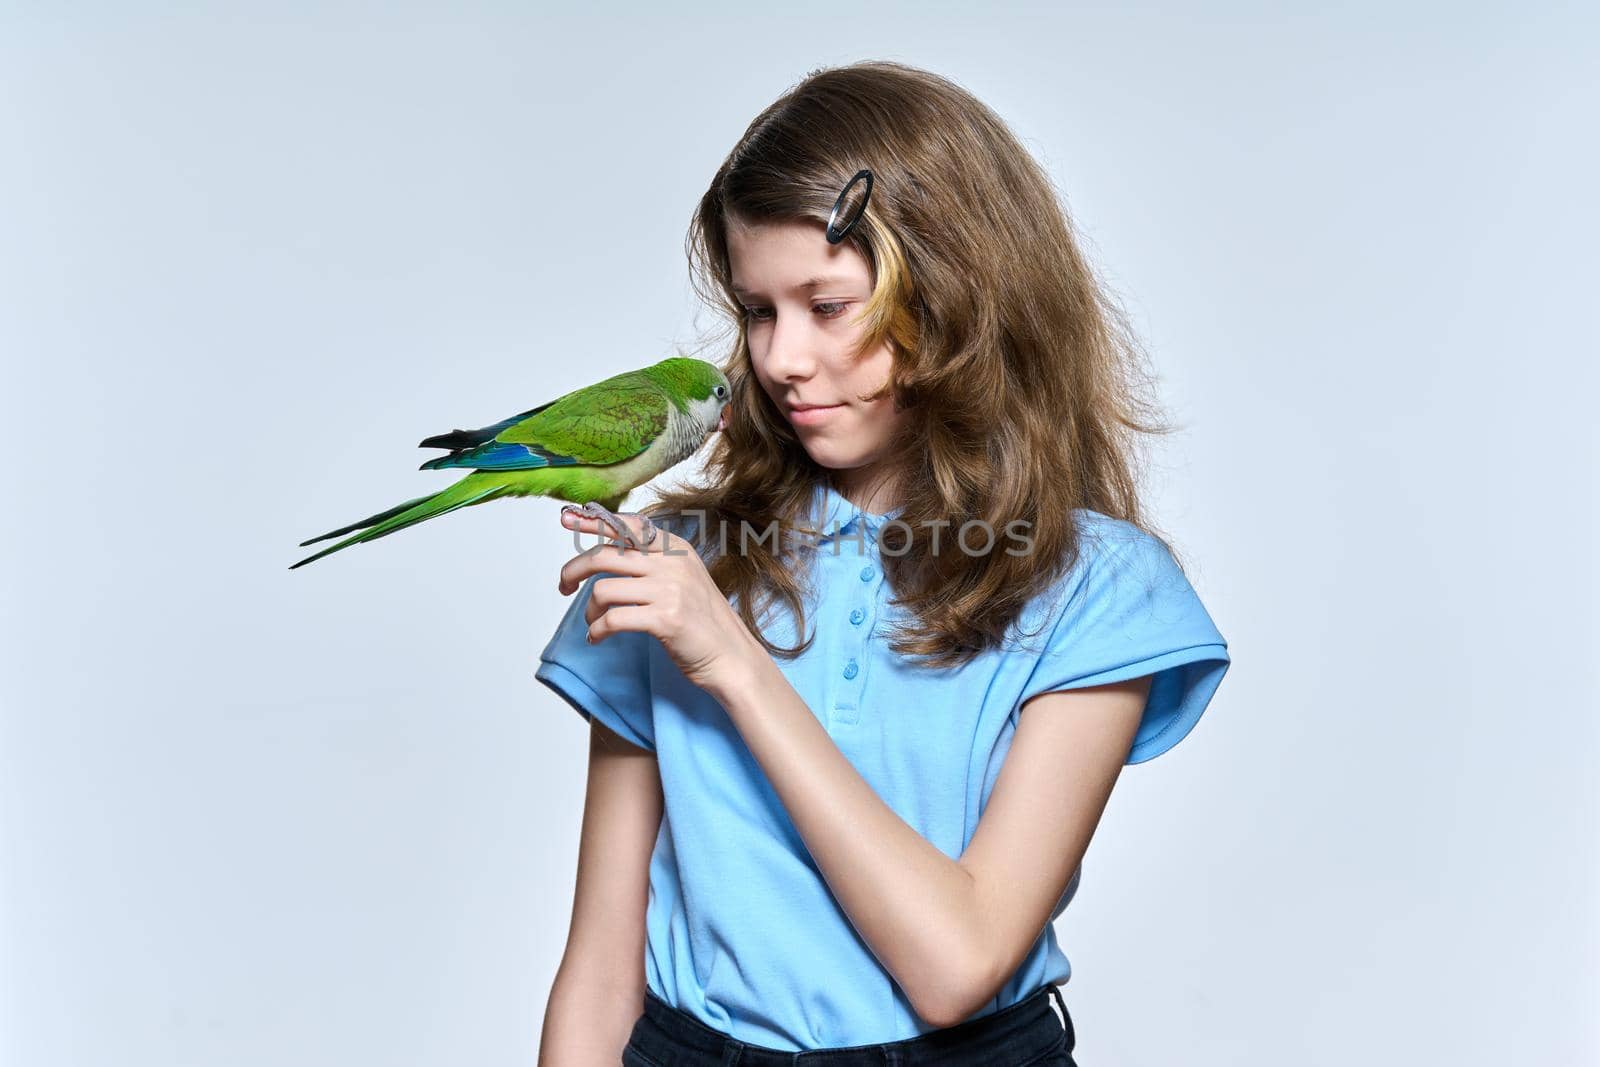 Smiling child girl with green quaker parrot looking at pet on light studio background. Animals, bird owner, childhood, child and pet friendship concept